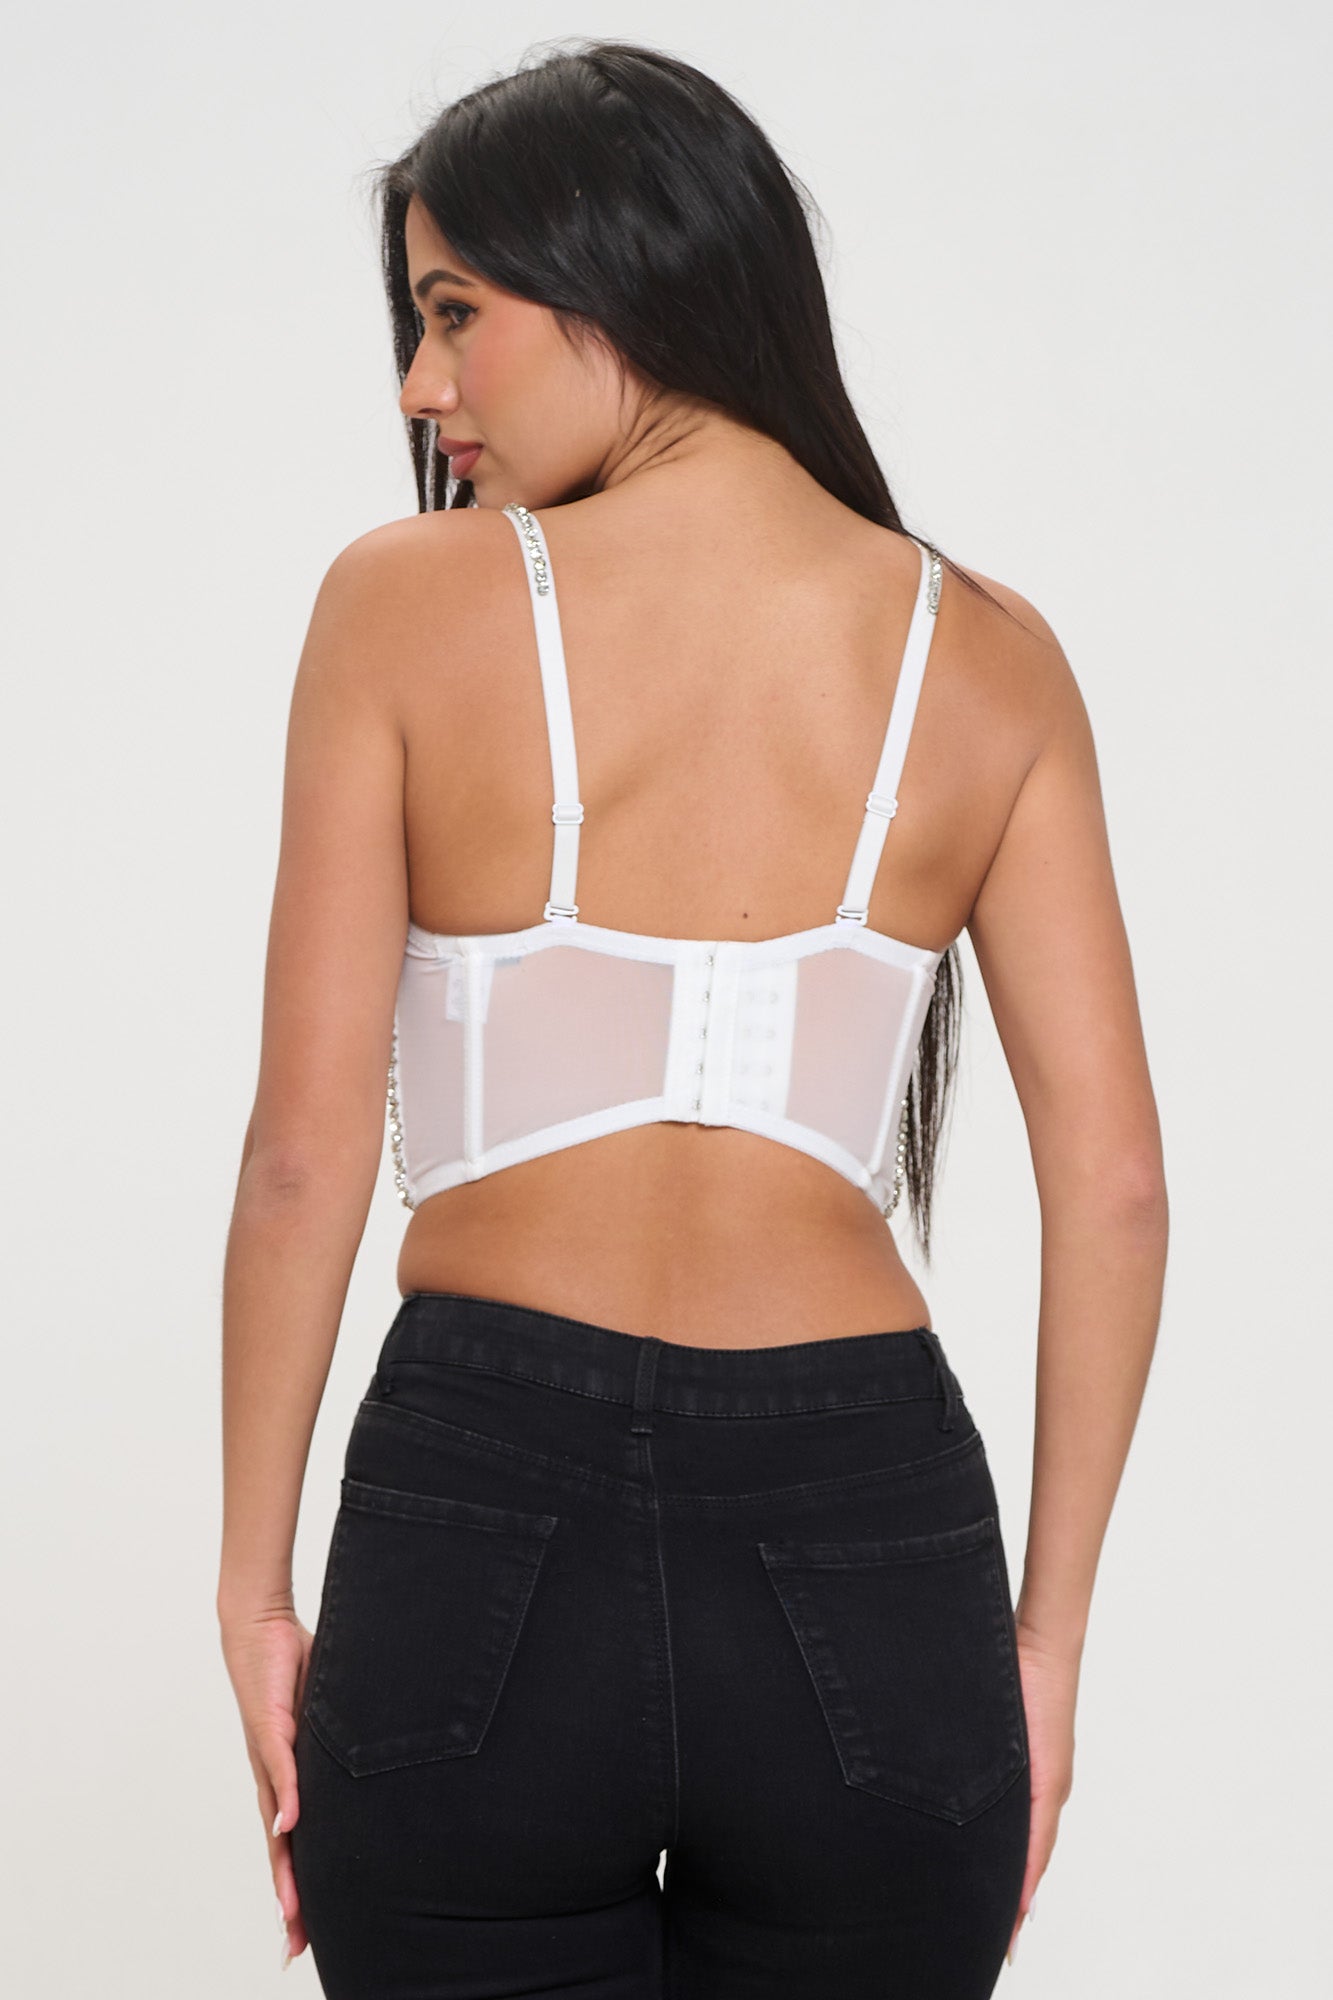 WHITE PEARL RHINETONE EMBELLISHED BUSTIER TOP